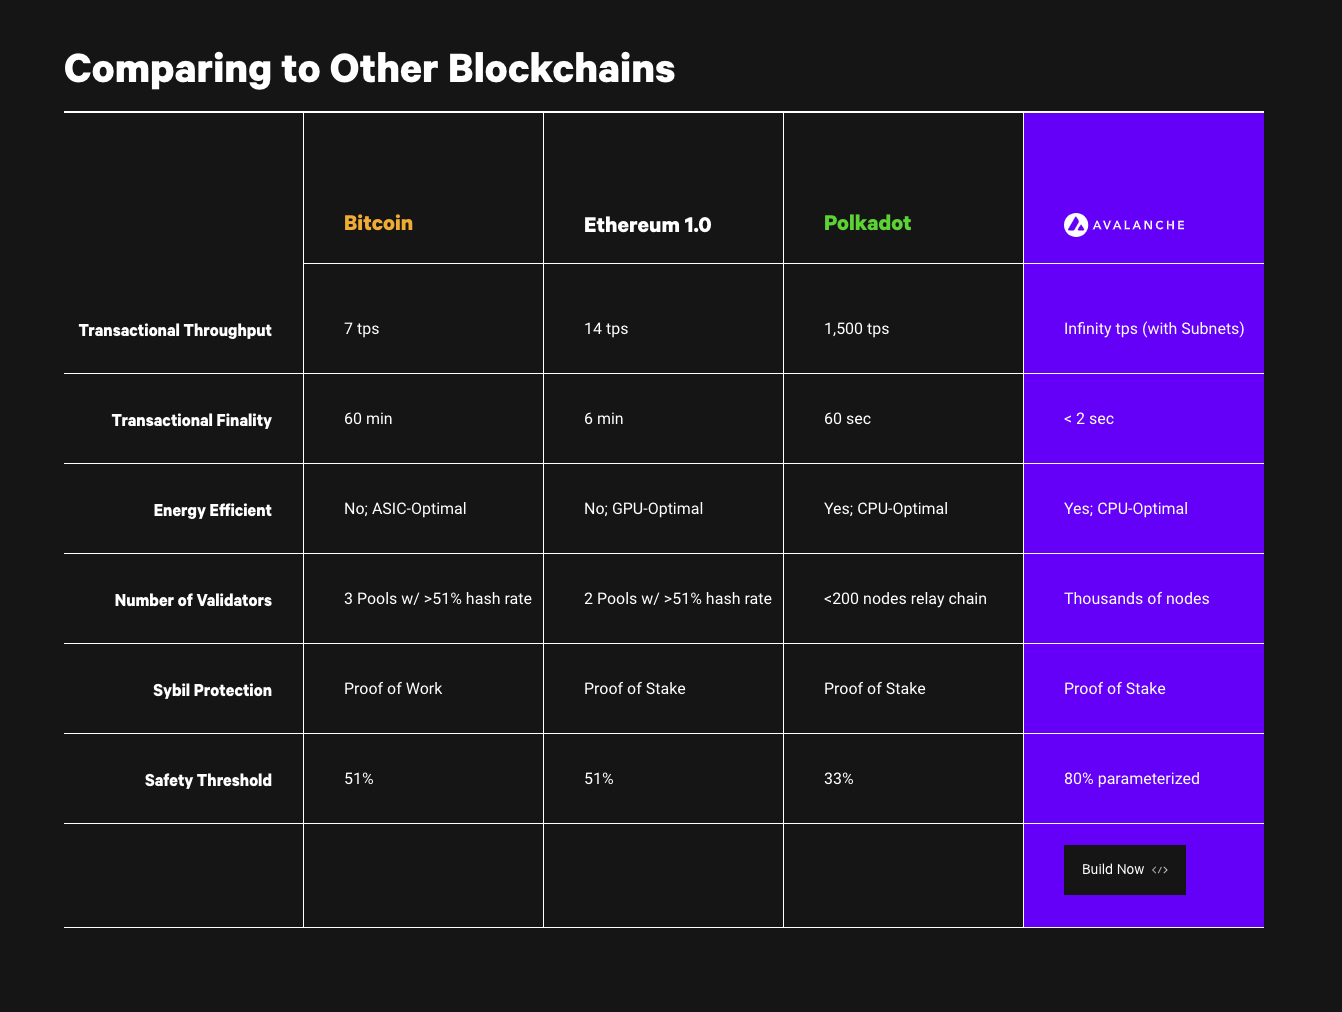 Screenshot of Avalanche blockchain compared to others.